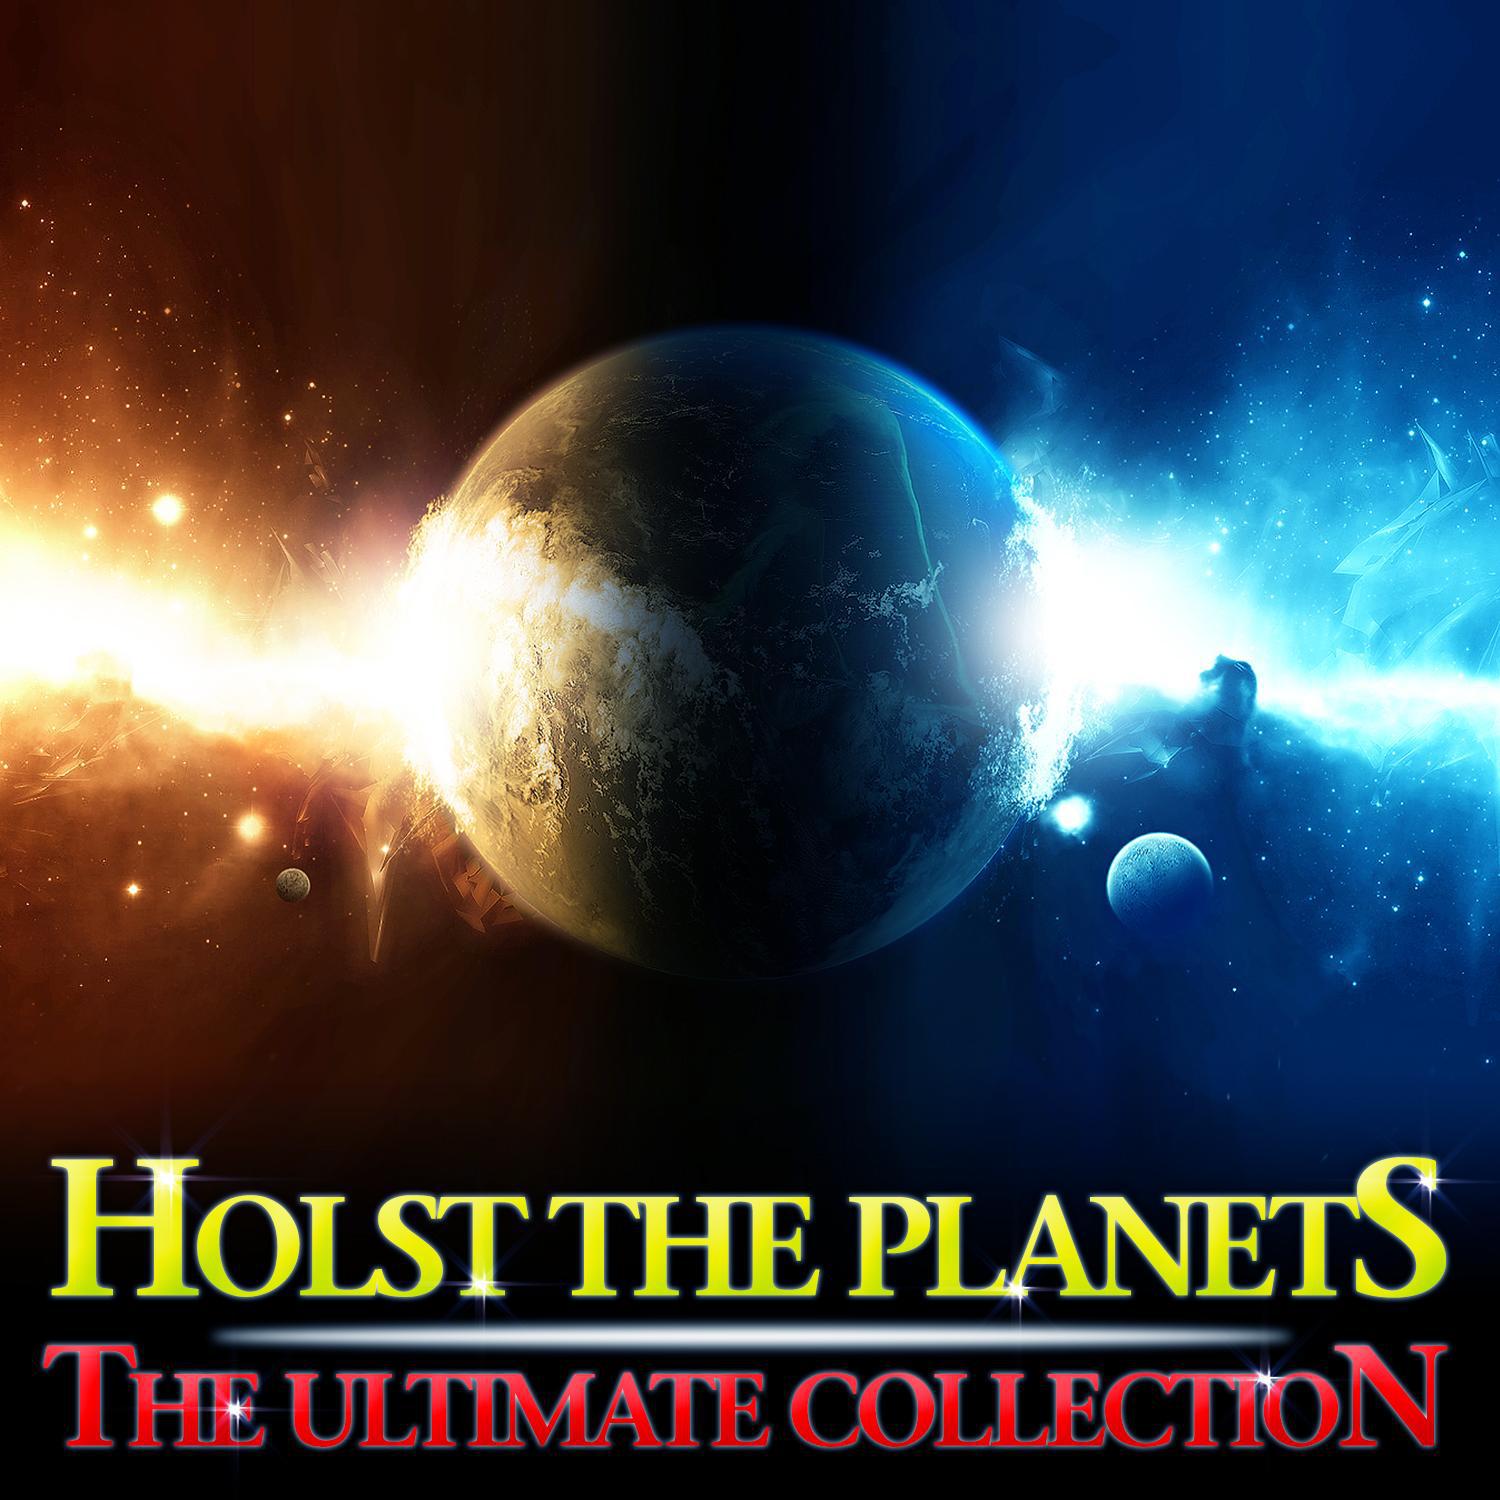 Holst The Planets - The Ultimate Collection